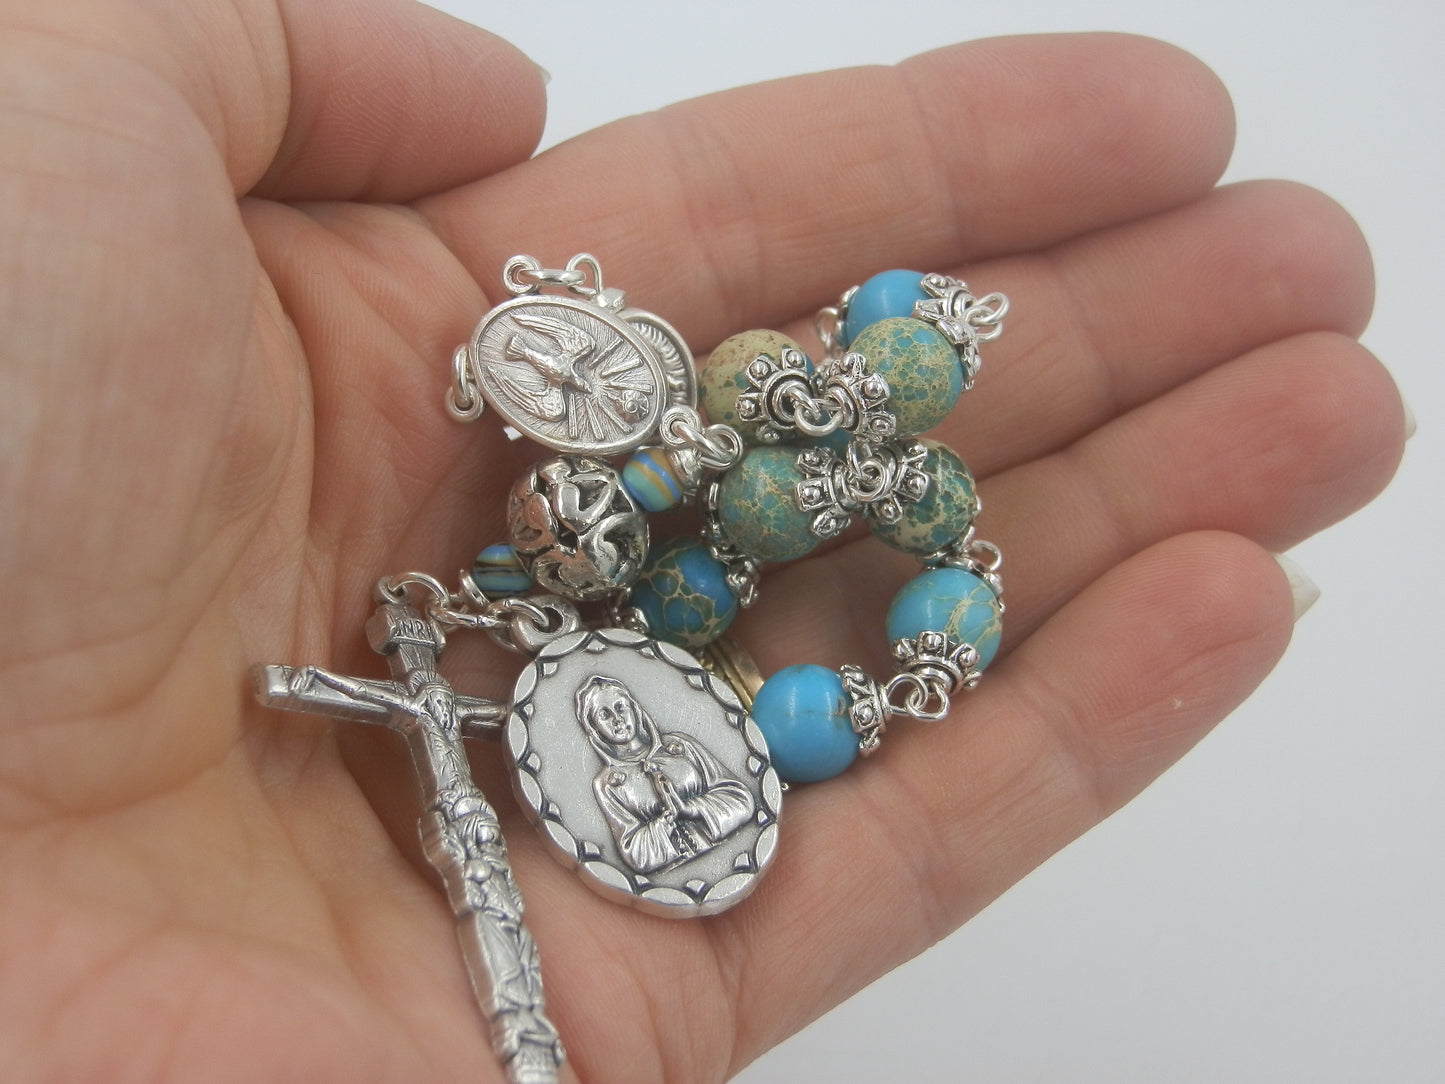 Maria Rosa Mistica handcrafted single decade prayer Beads, Holy Spirit Rosary beads, Our Lady of Sorrows Crucifix, pocket prayer beads.